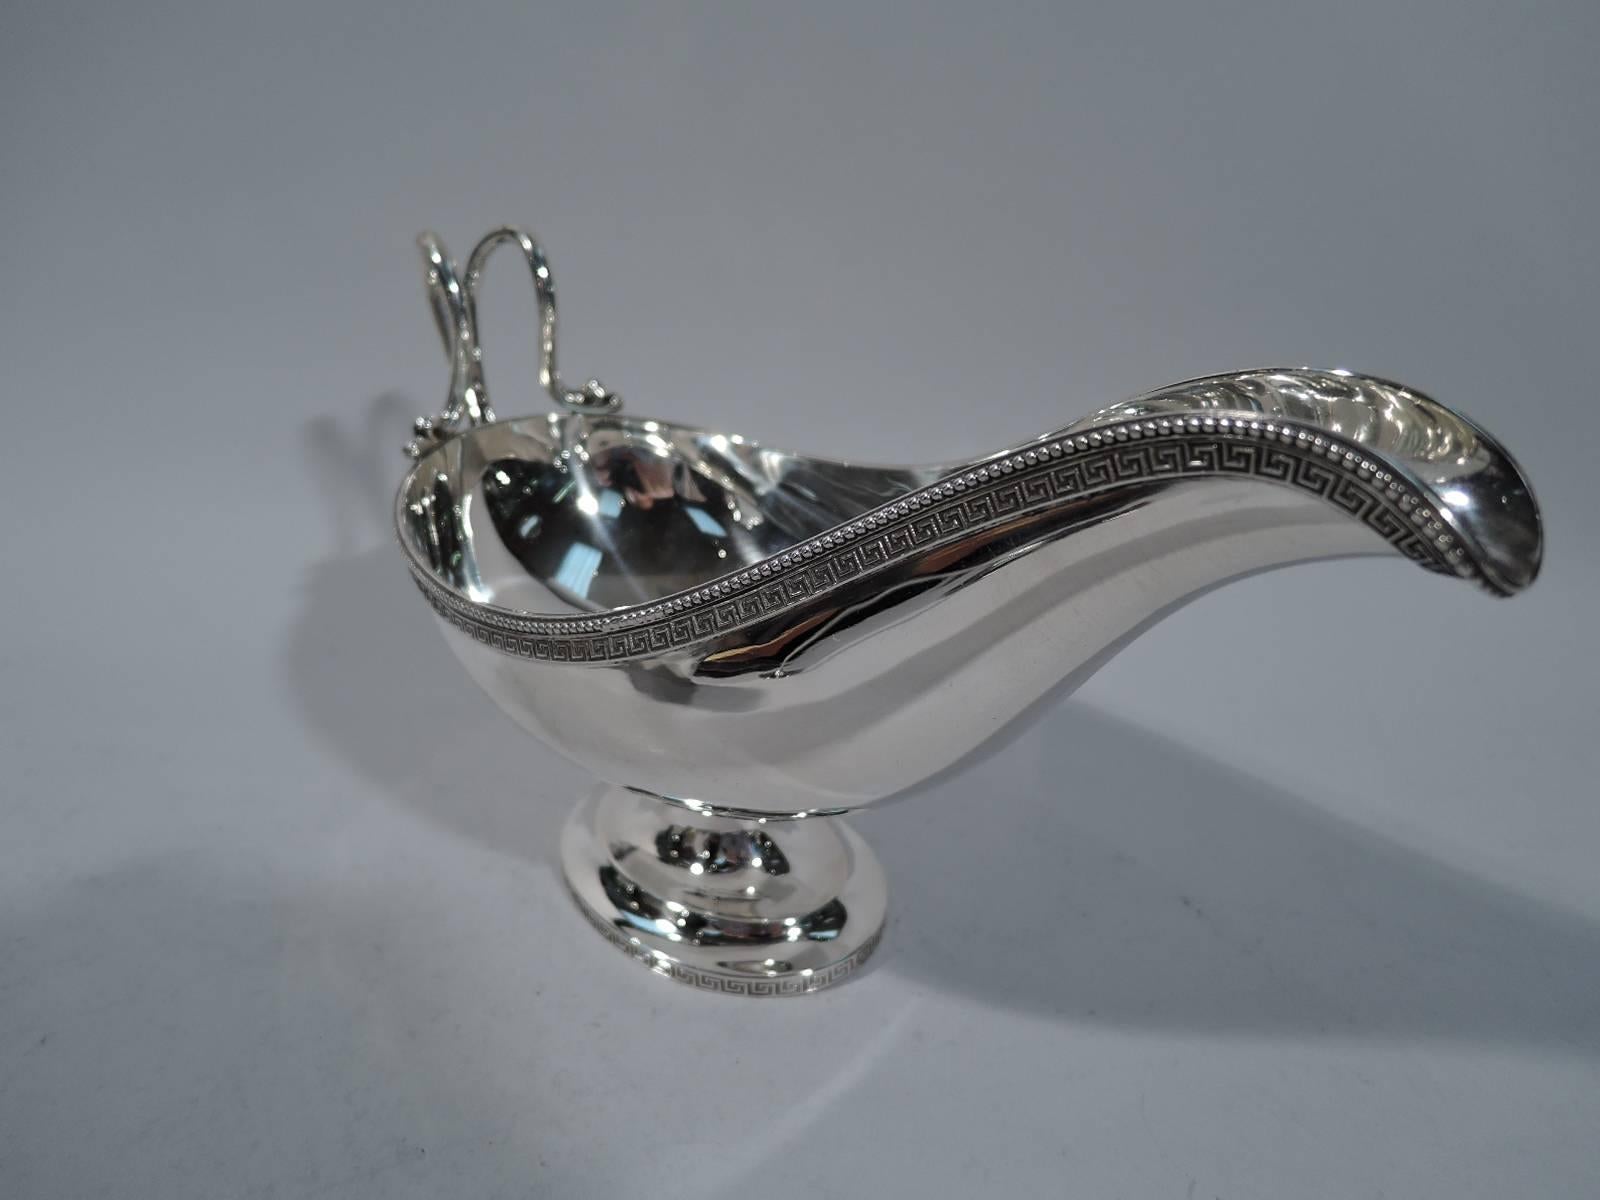 Greek Revival sterling silver gravy boat. Made by Tiffany & Co. in New York, circa 1855. Elongated bowl with helmet mouth, split high-looping handle with leaf mount, short stem, and raised oval foot. Rims have fretwork borders. Mouth rim also has